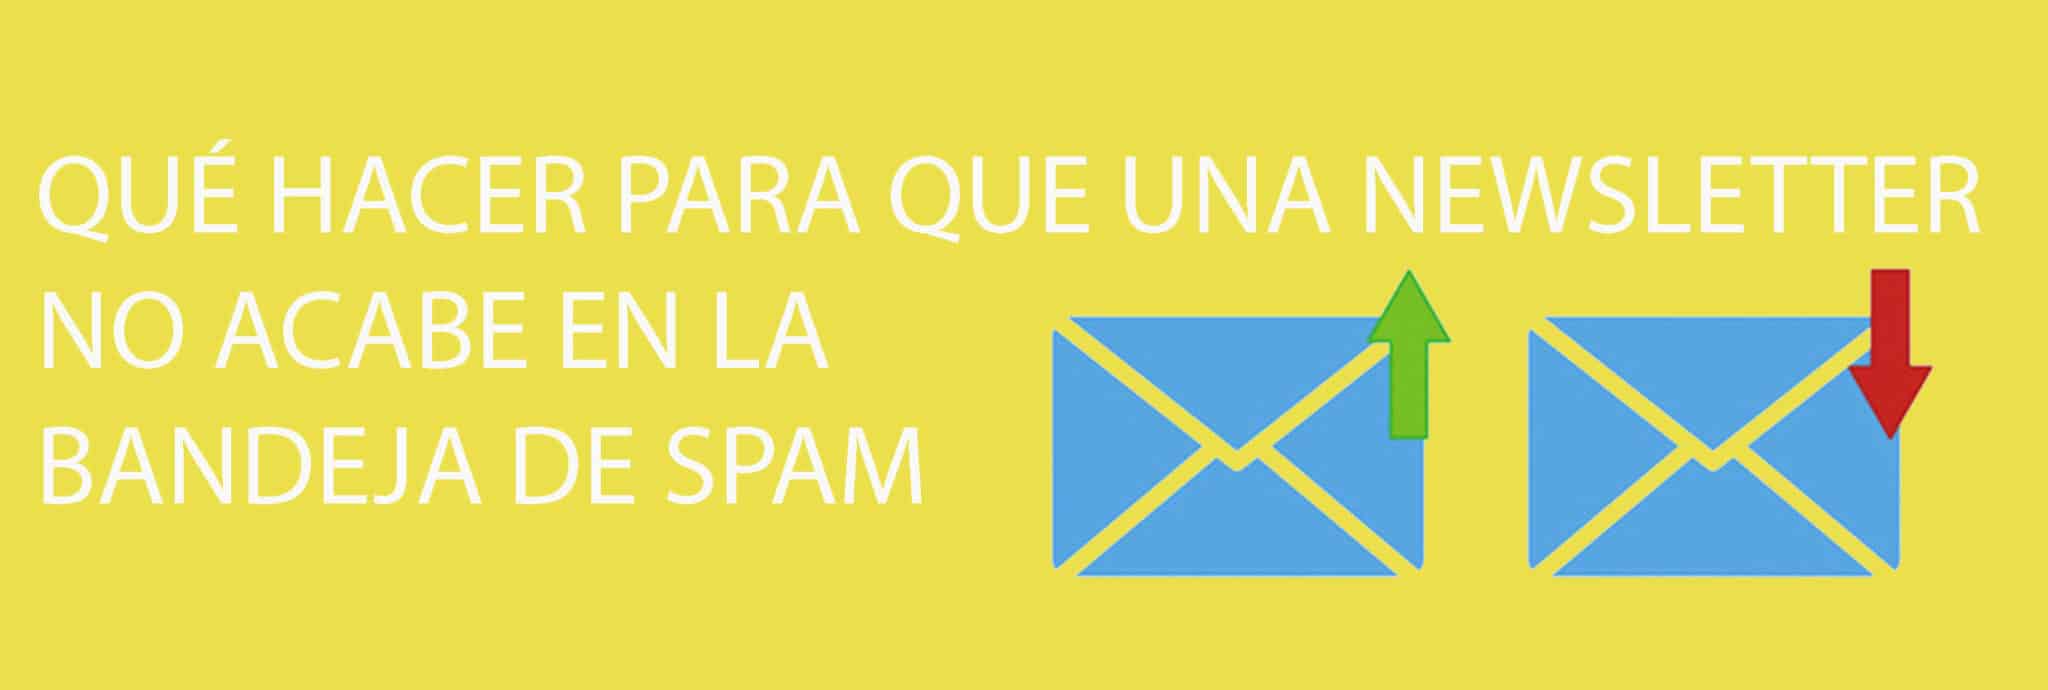 campaña email marketing